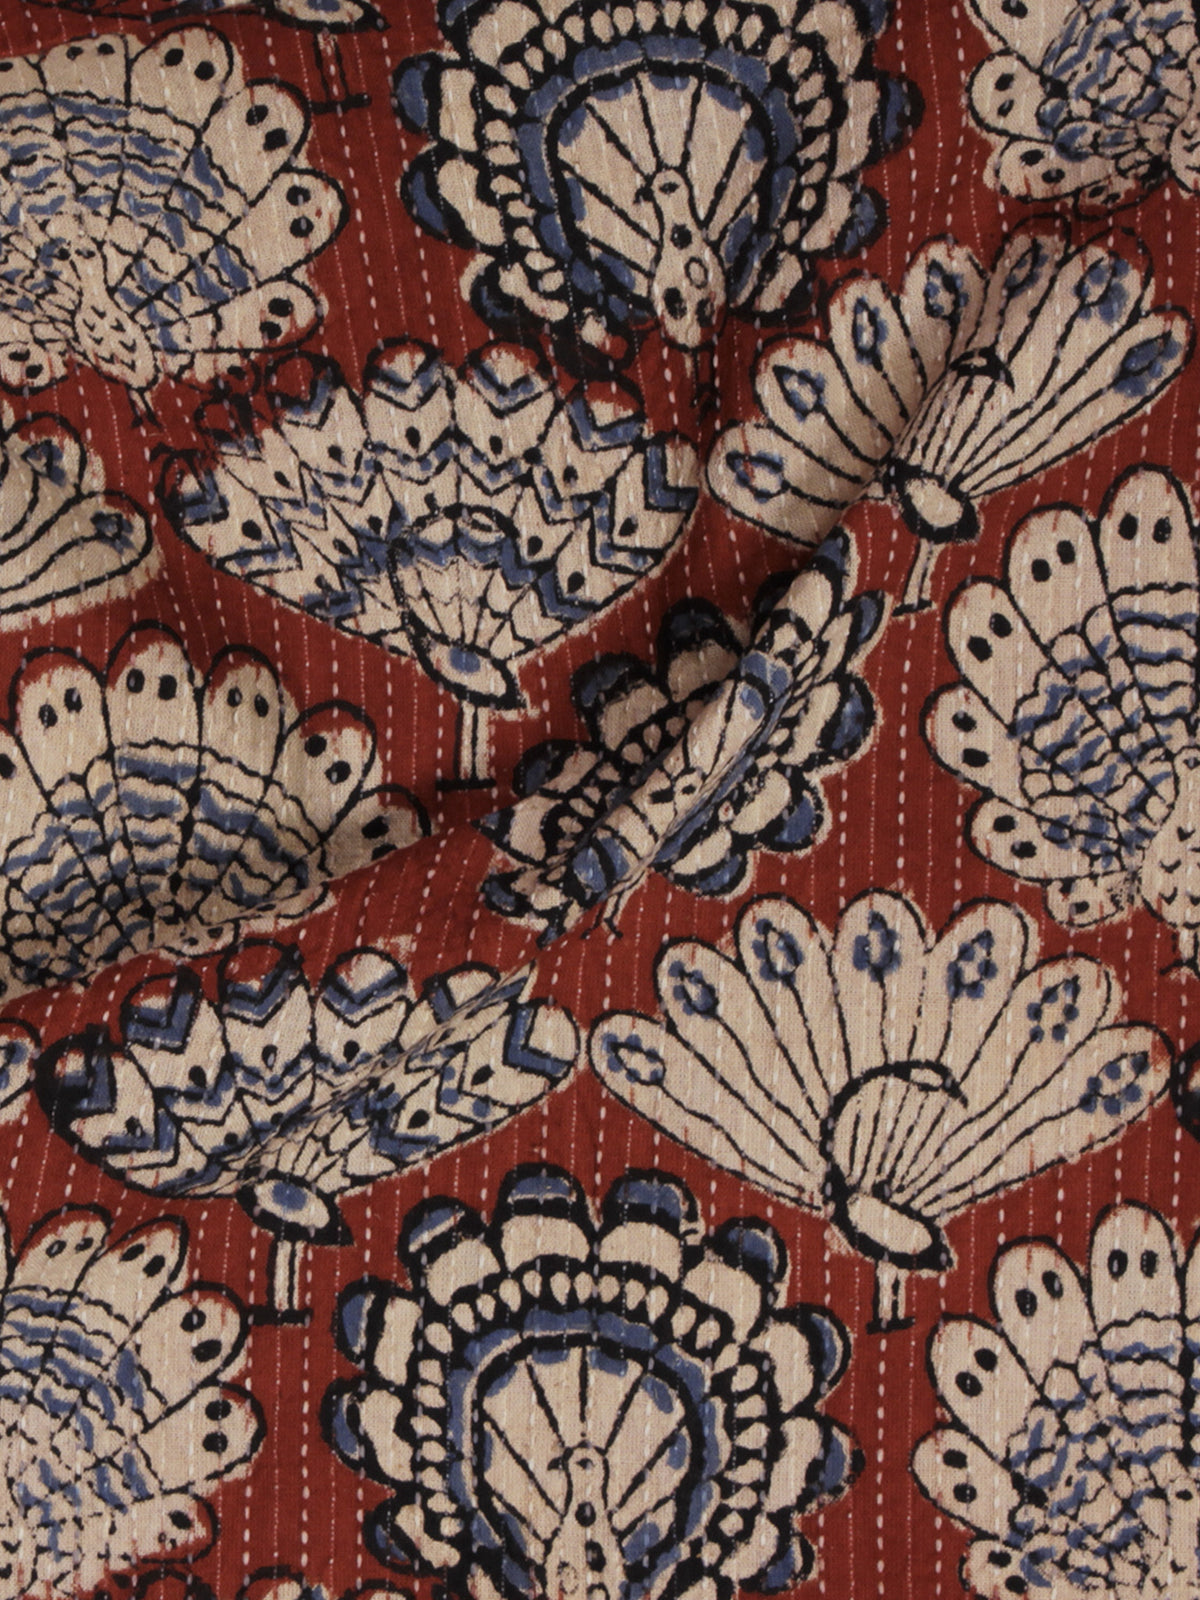 Maroon Beige Black Kantha Embroidered Hand Block Peacock Printed Cotton Fabric - F001F565